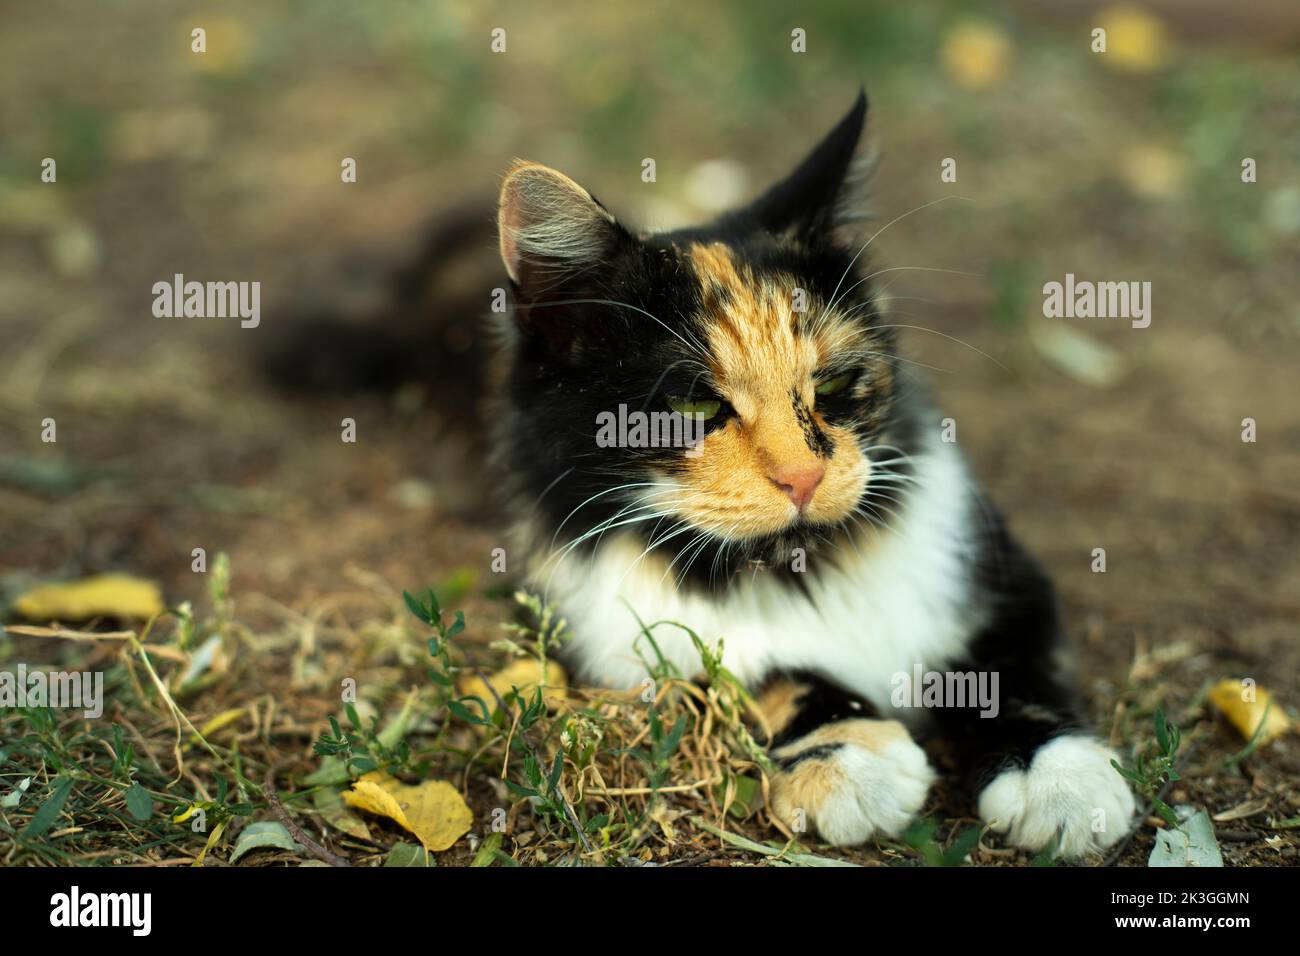 Cat with different coats. Pet on street. Cute cat in park. Animal in garden. Details of pet's life. Stock Photo